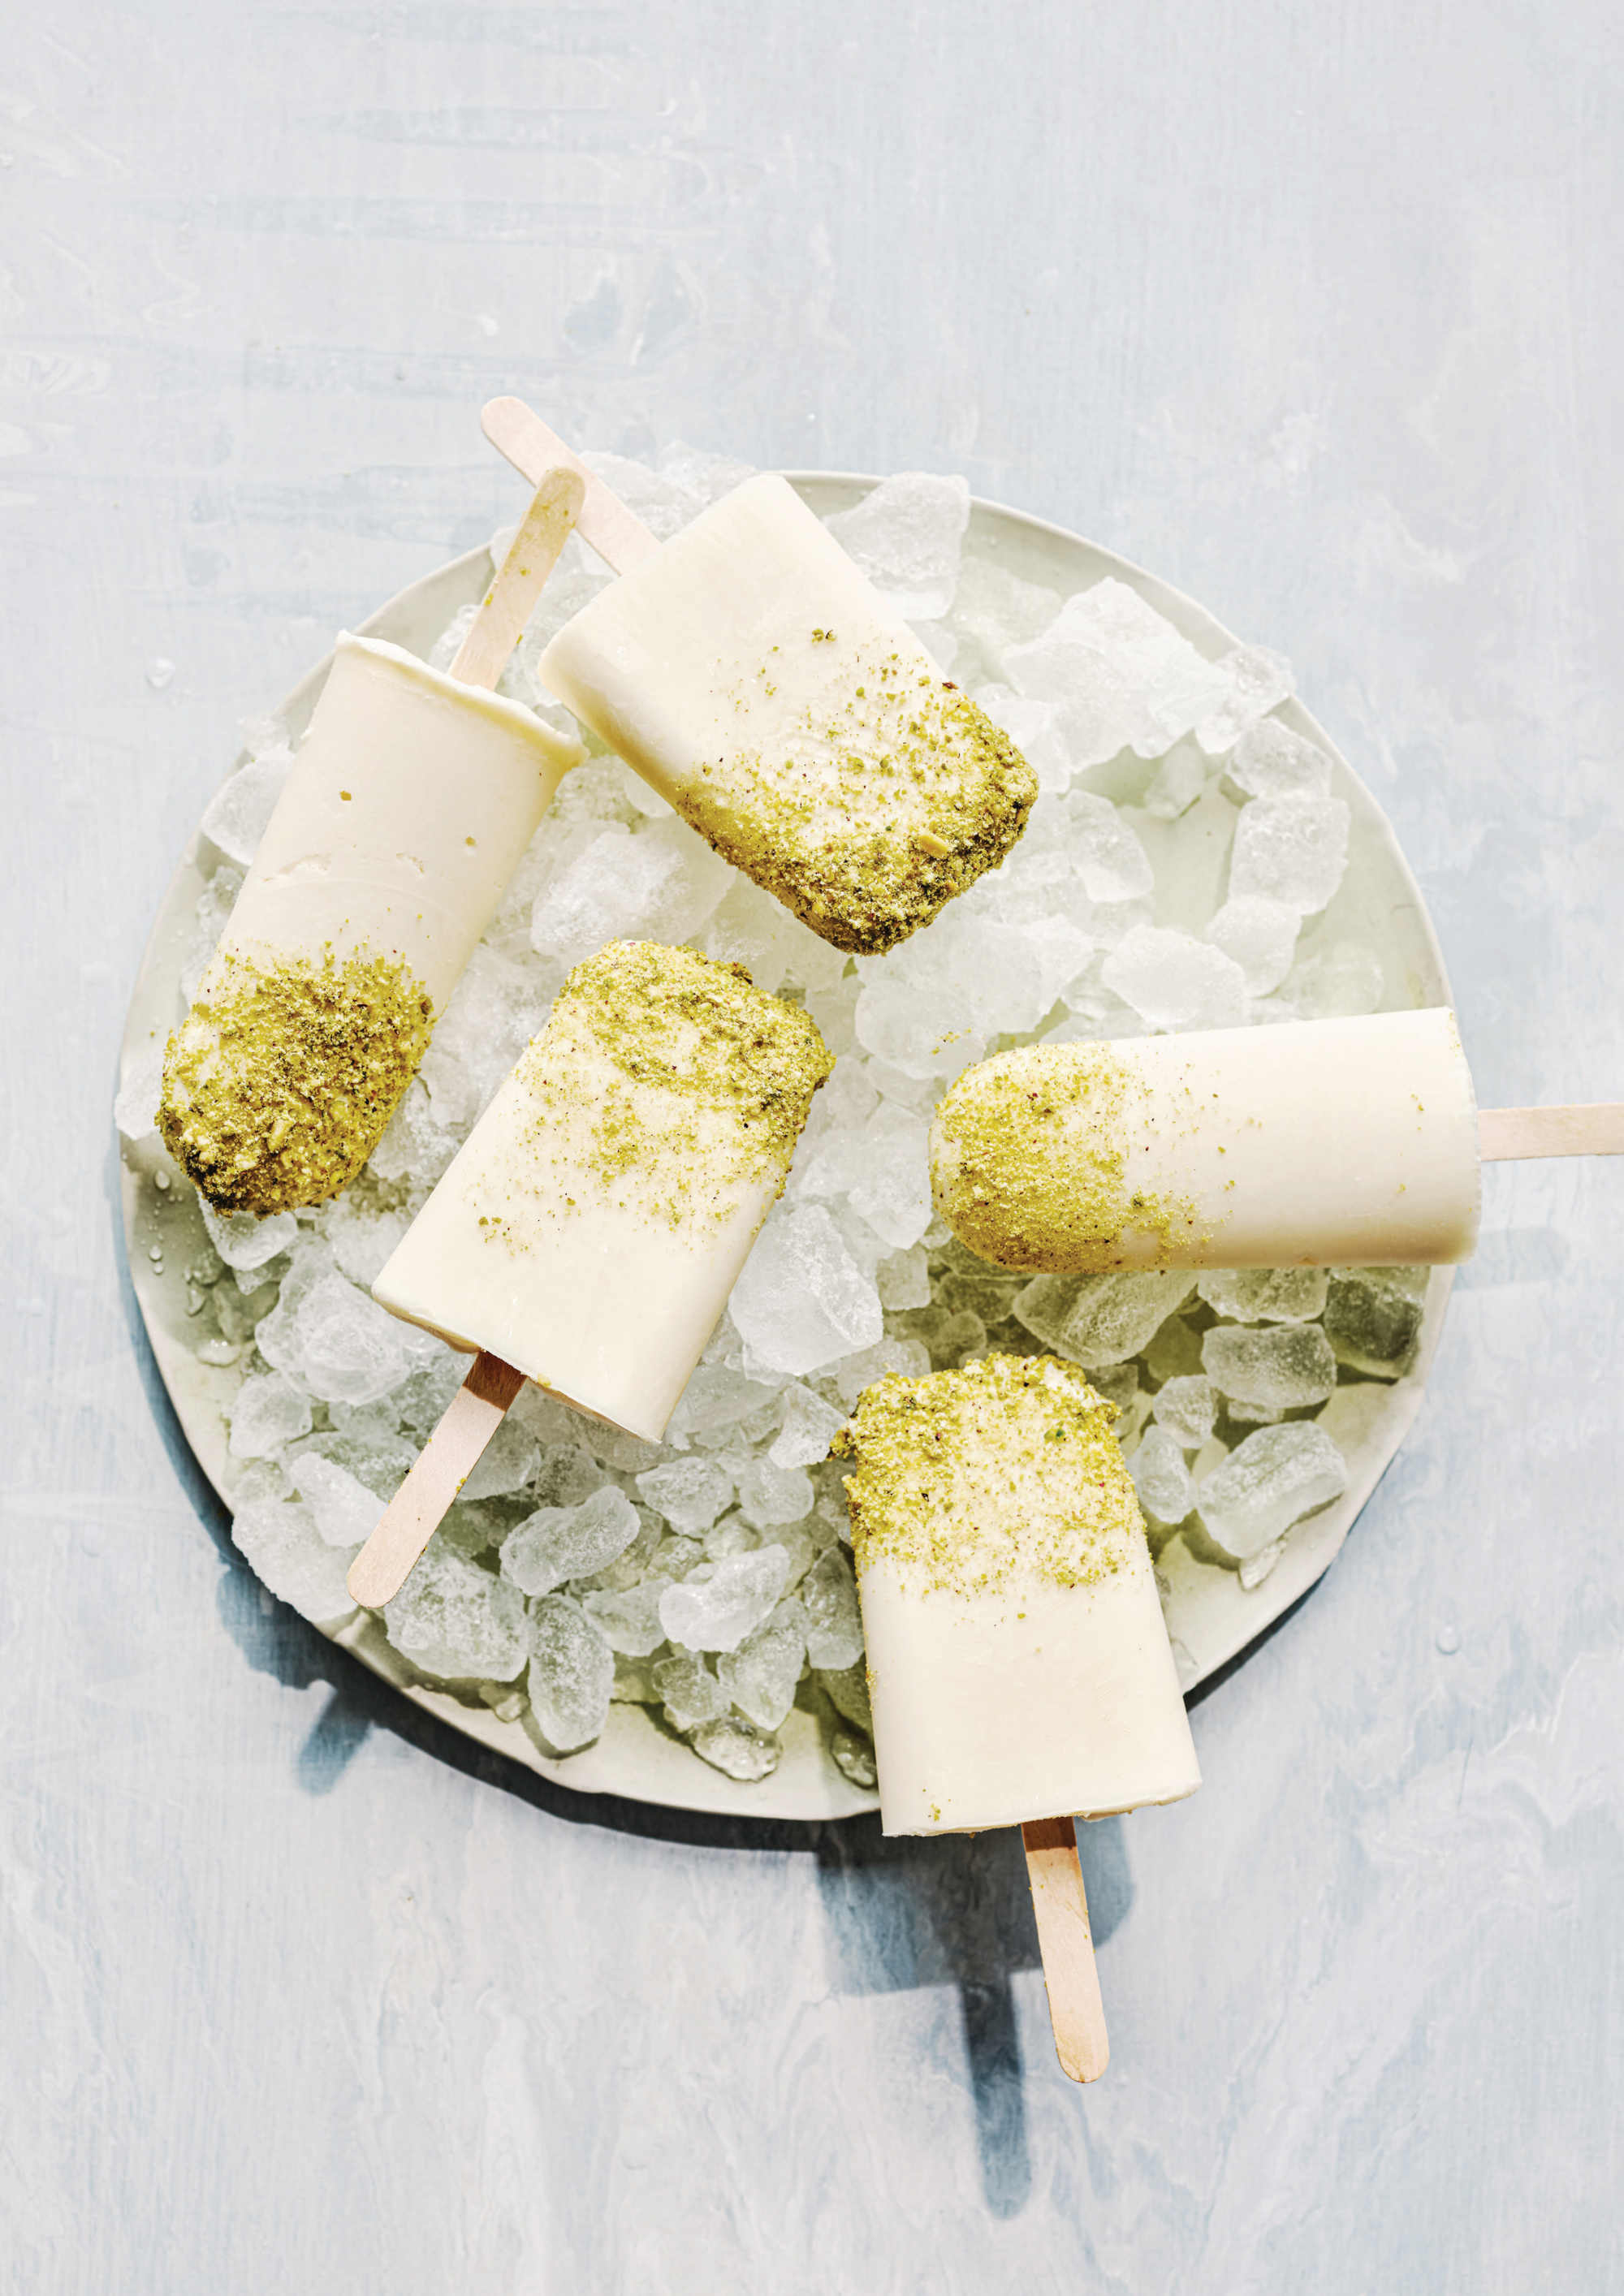 Yogurt and honey ice pops. Photography: Liz and Max Haarala Hamilton. From Middle Eastern Sweets